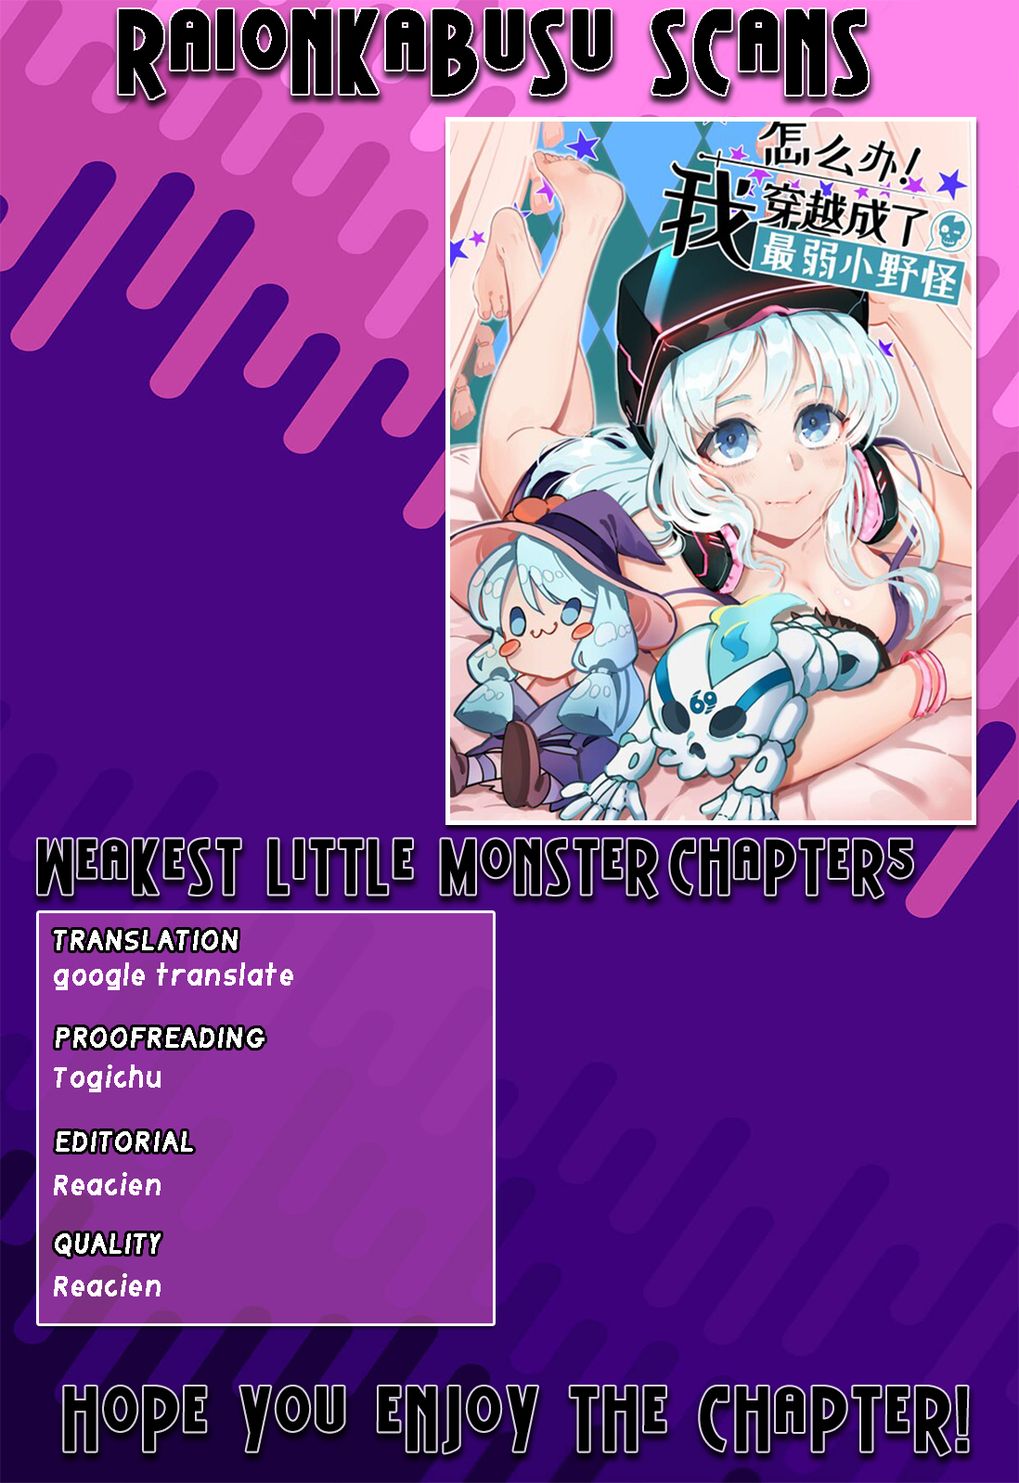 Weakest Little Monster Ch. 5 Welcome to Azure World